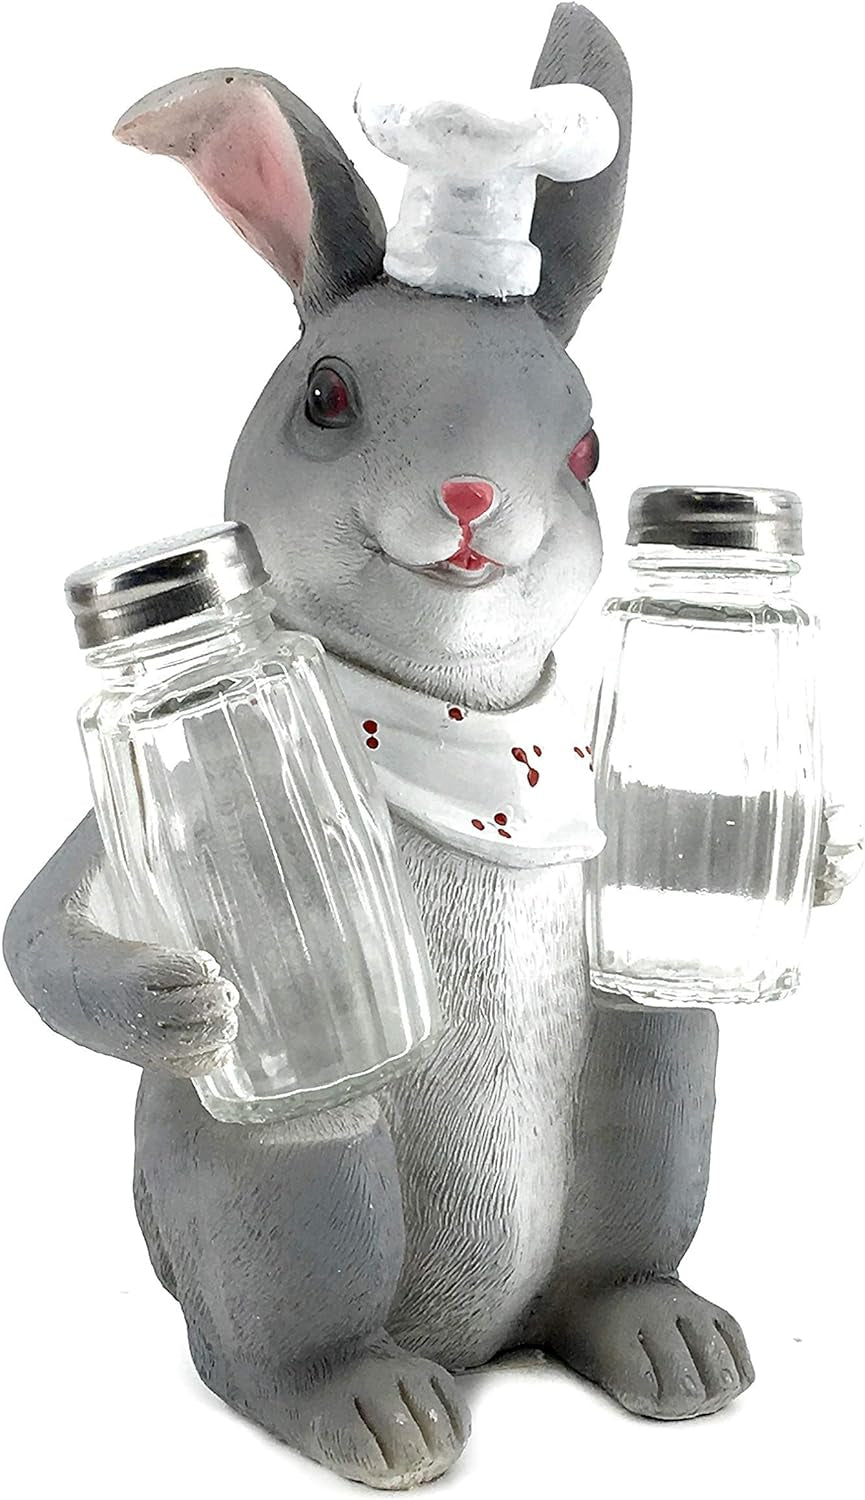 Bunny Rabbit Salt & Pepper Shaker Set Funny French Chef Kitchen Easter Home Decor Figurines Sculptures 9 Inch